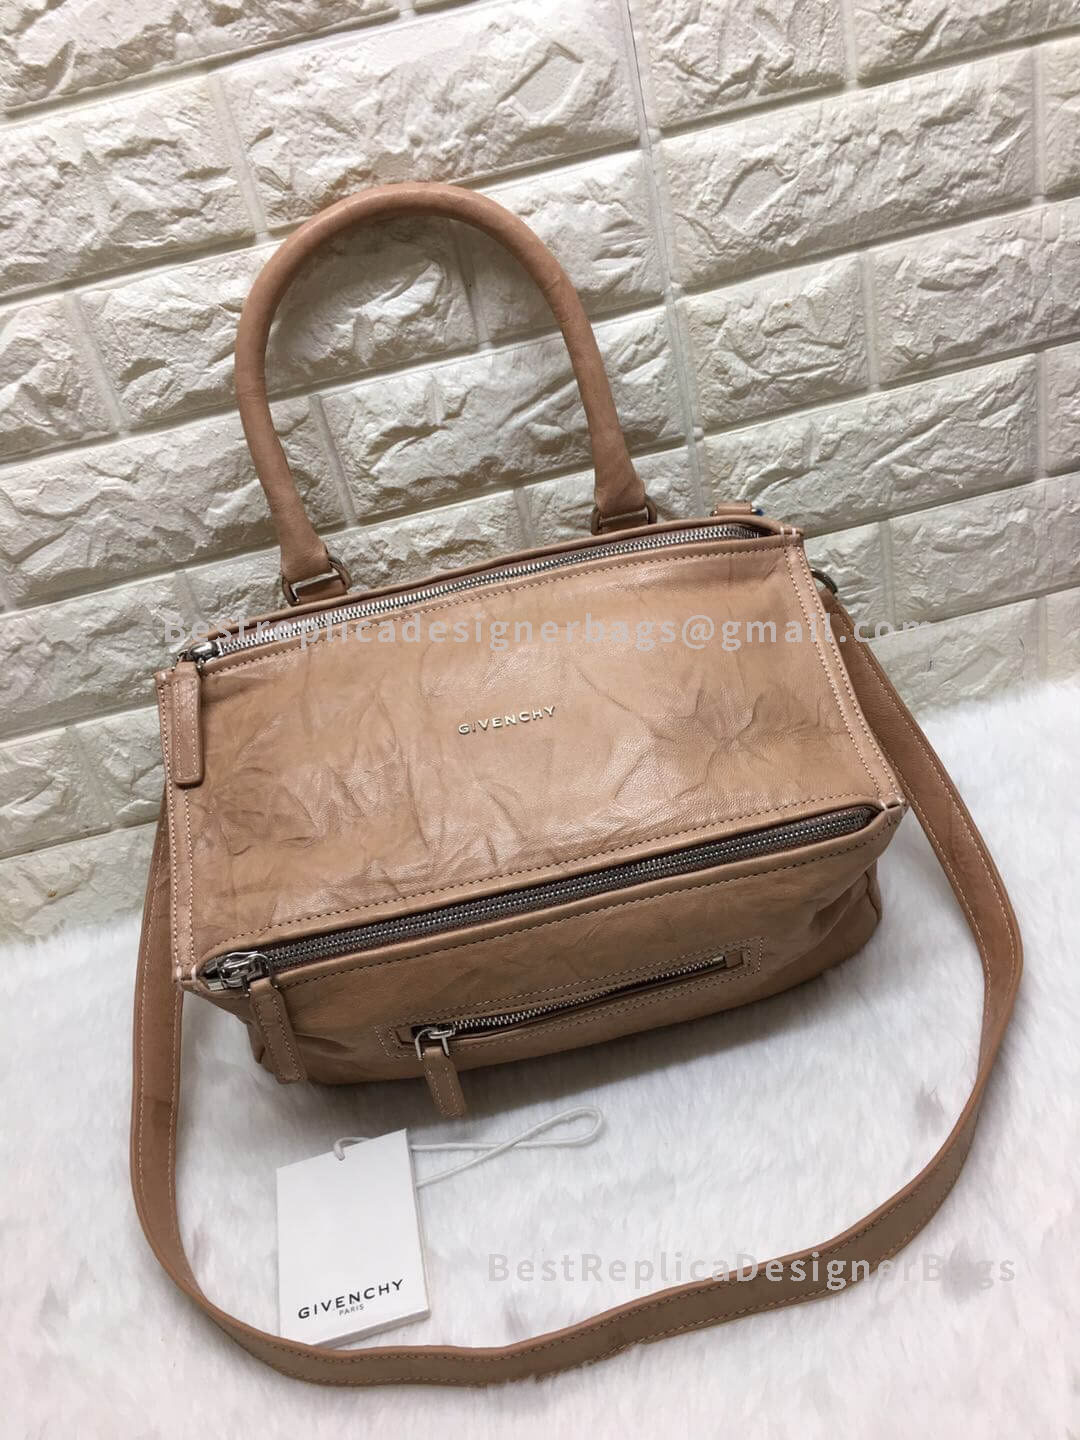 Givenchy Small Pandora Bag In Aged Leather Nude SHW 1-28608